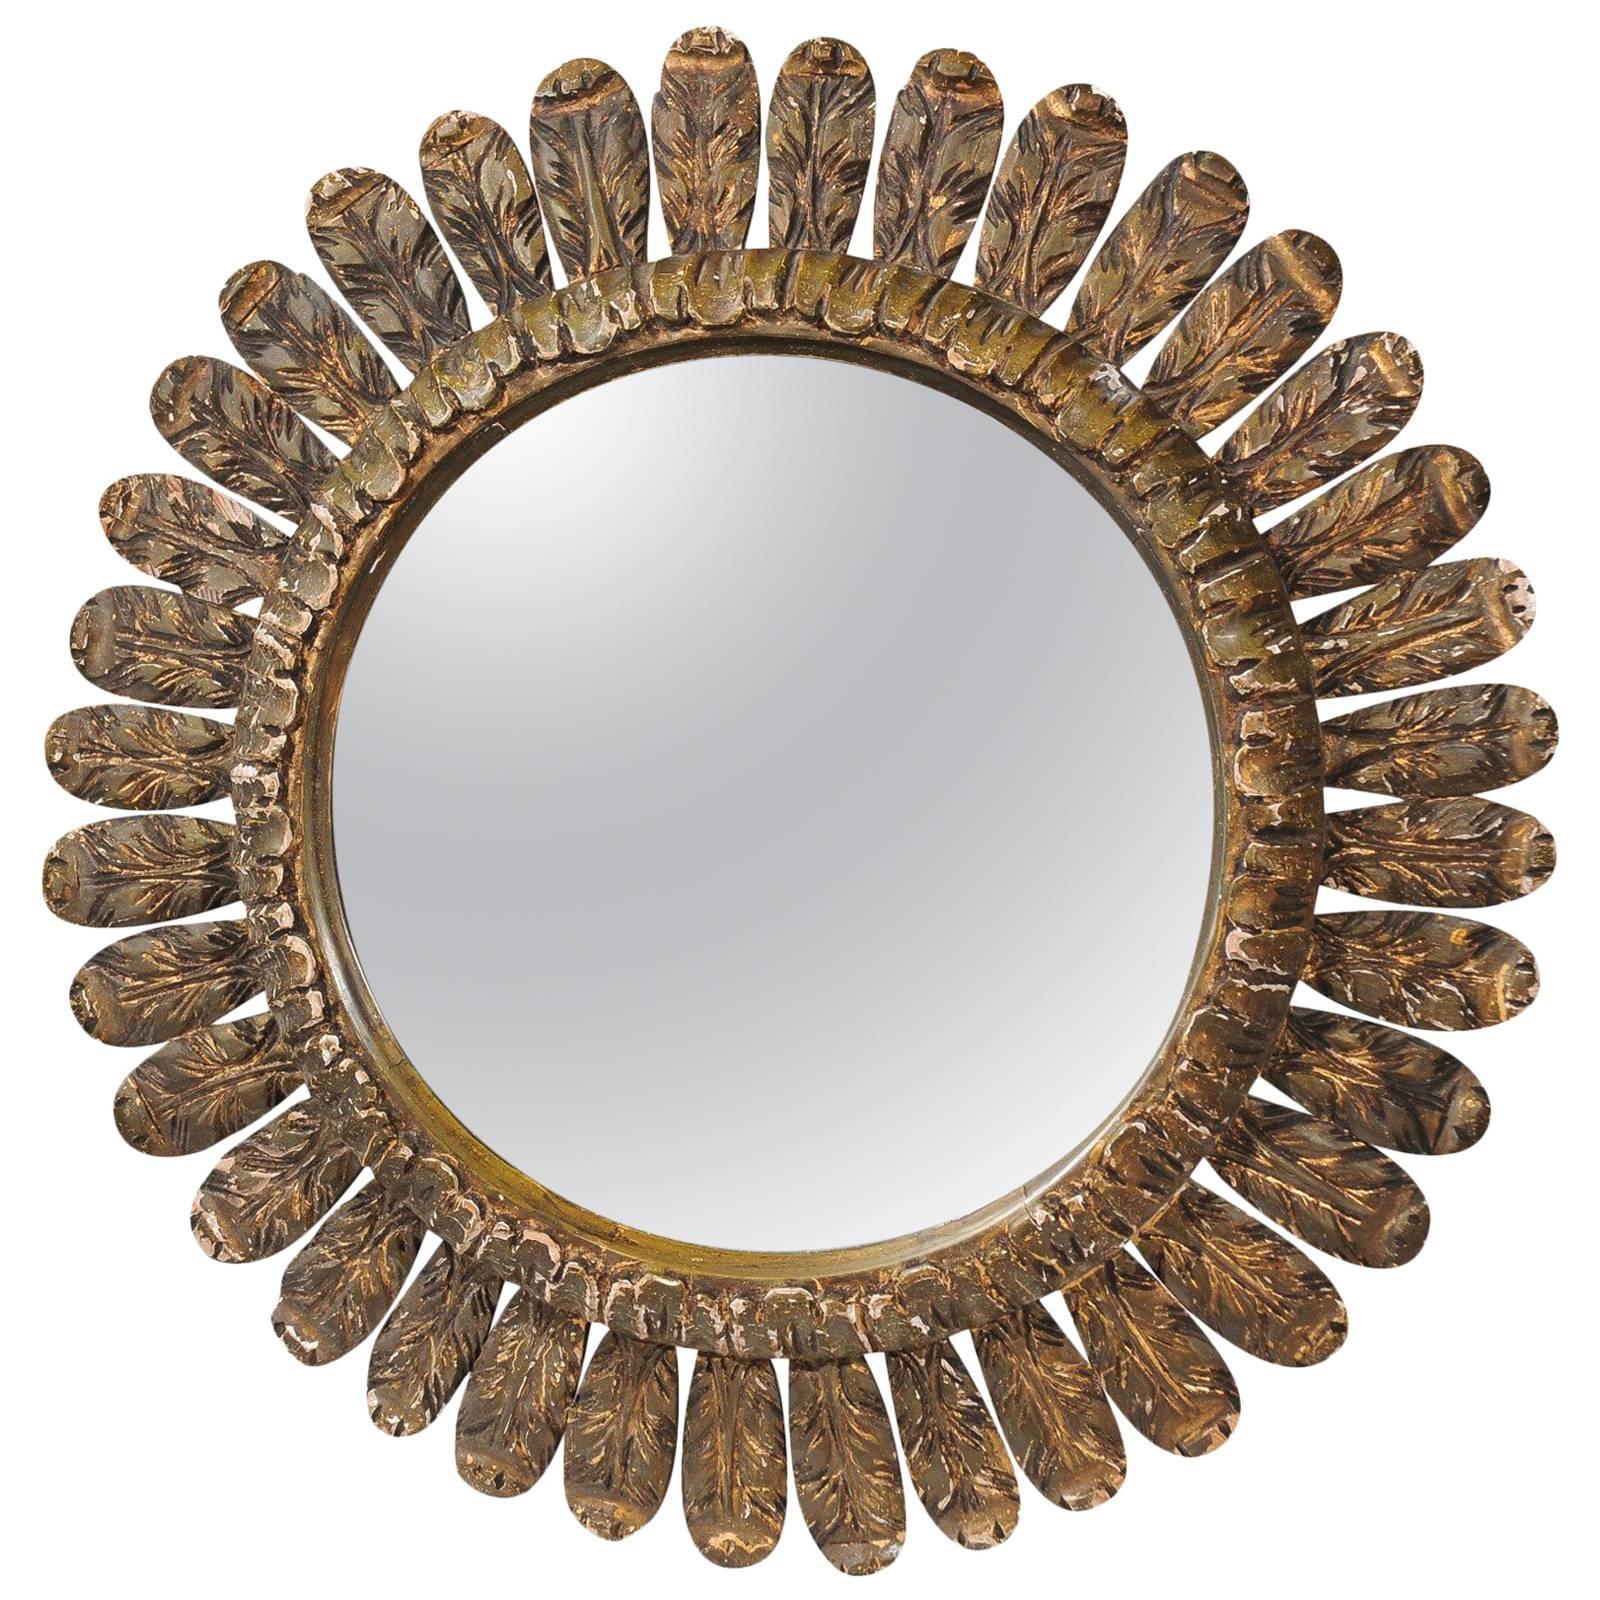 Italian Round Carved Wooden Mirror with Leaf Carving from the Mid-20th Century